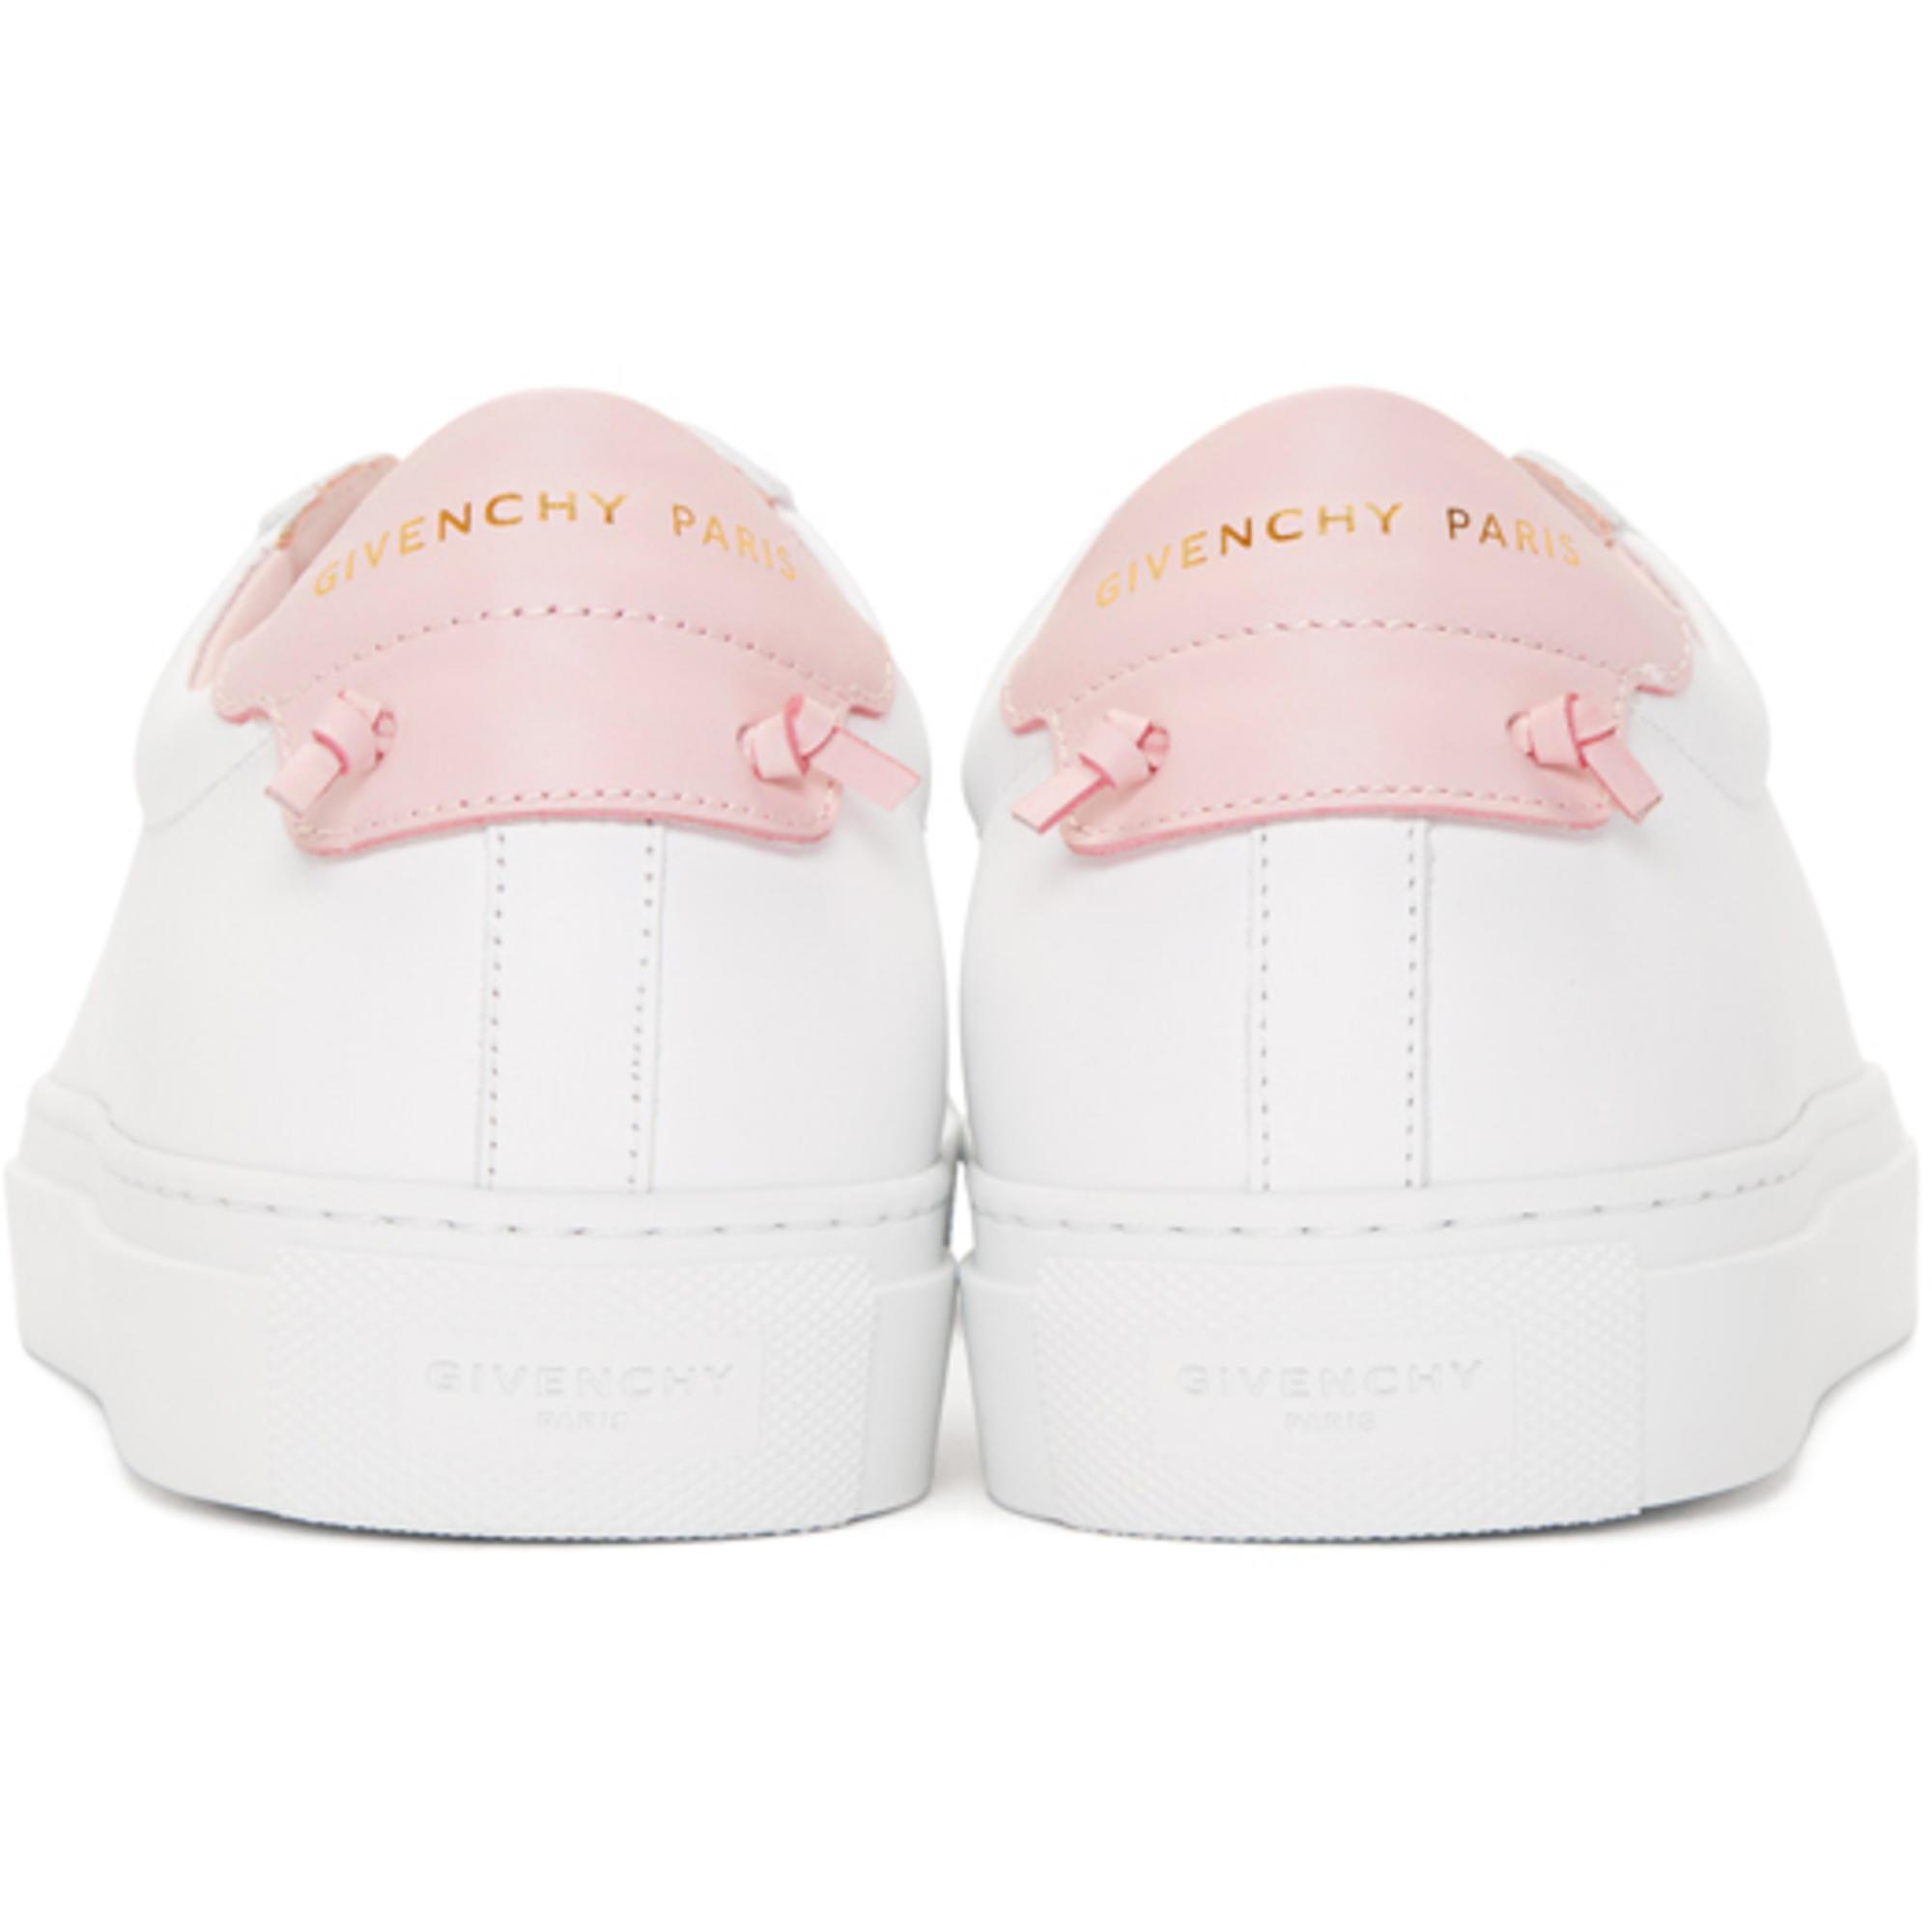 givenchy white & pink urban knots sneakers